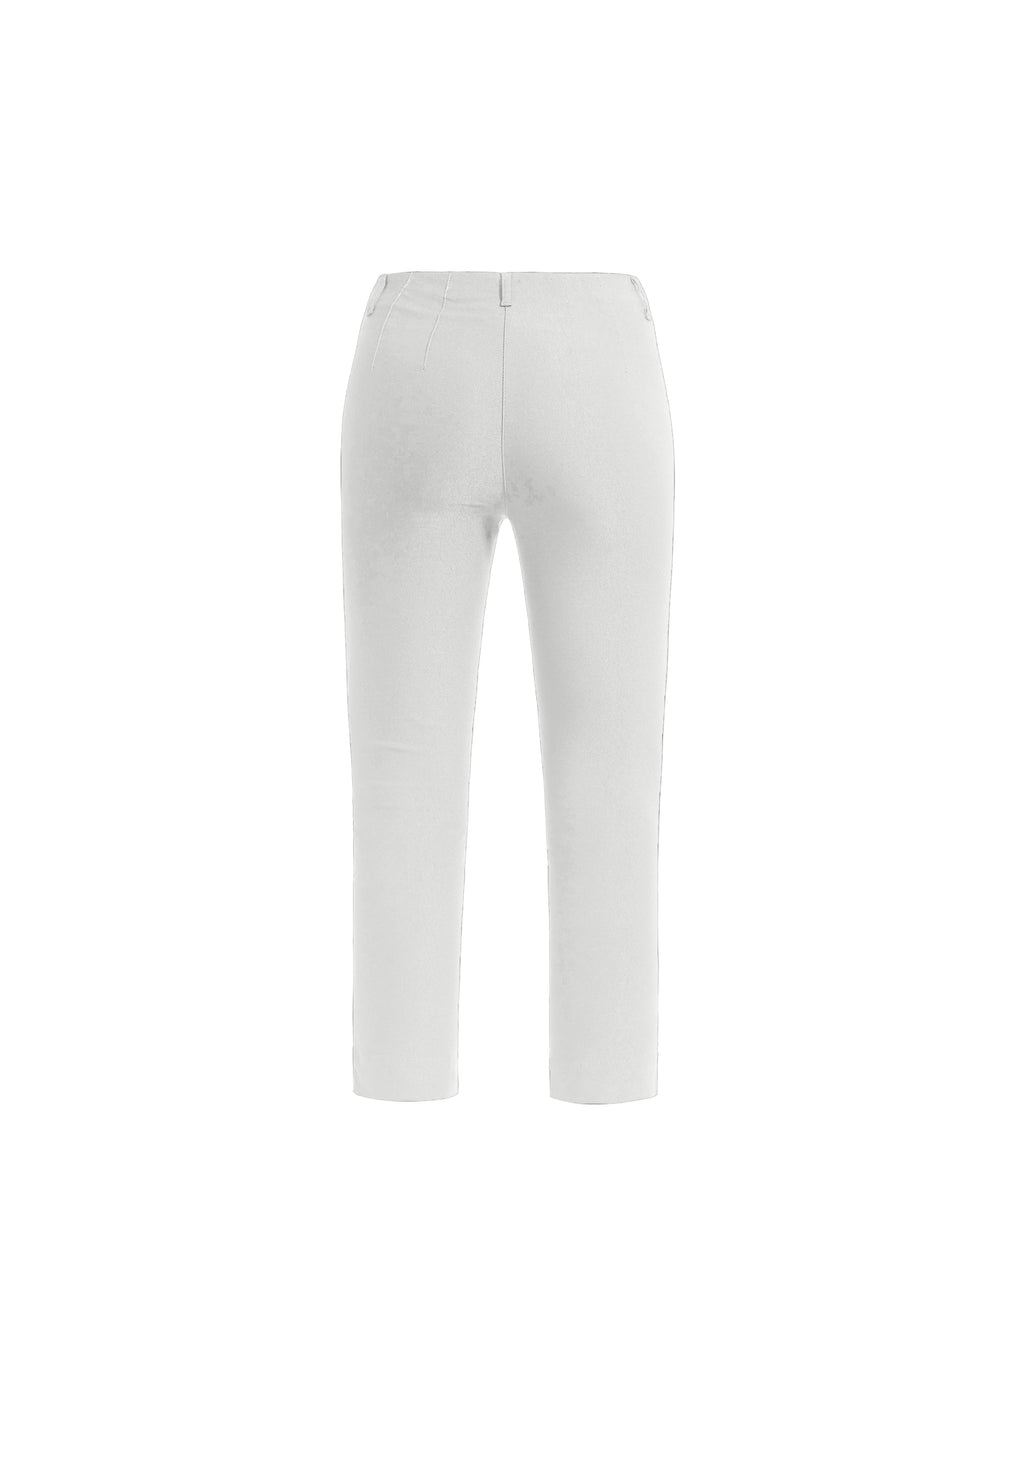 LAURIE Taylor Regular Crop Trousers REGULAR 10000 White